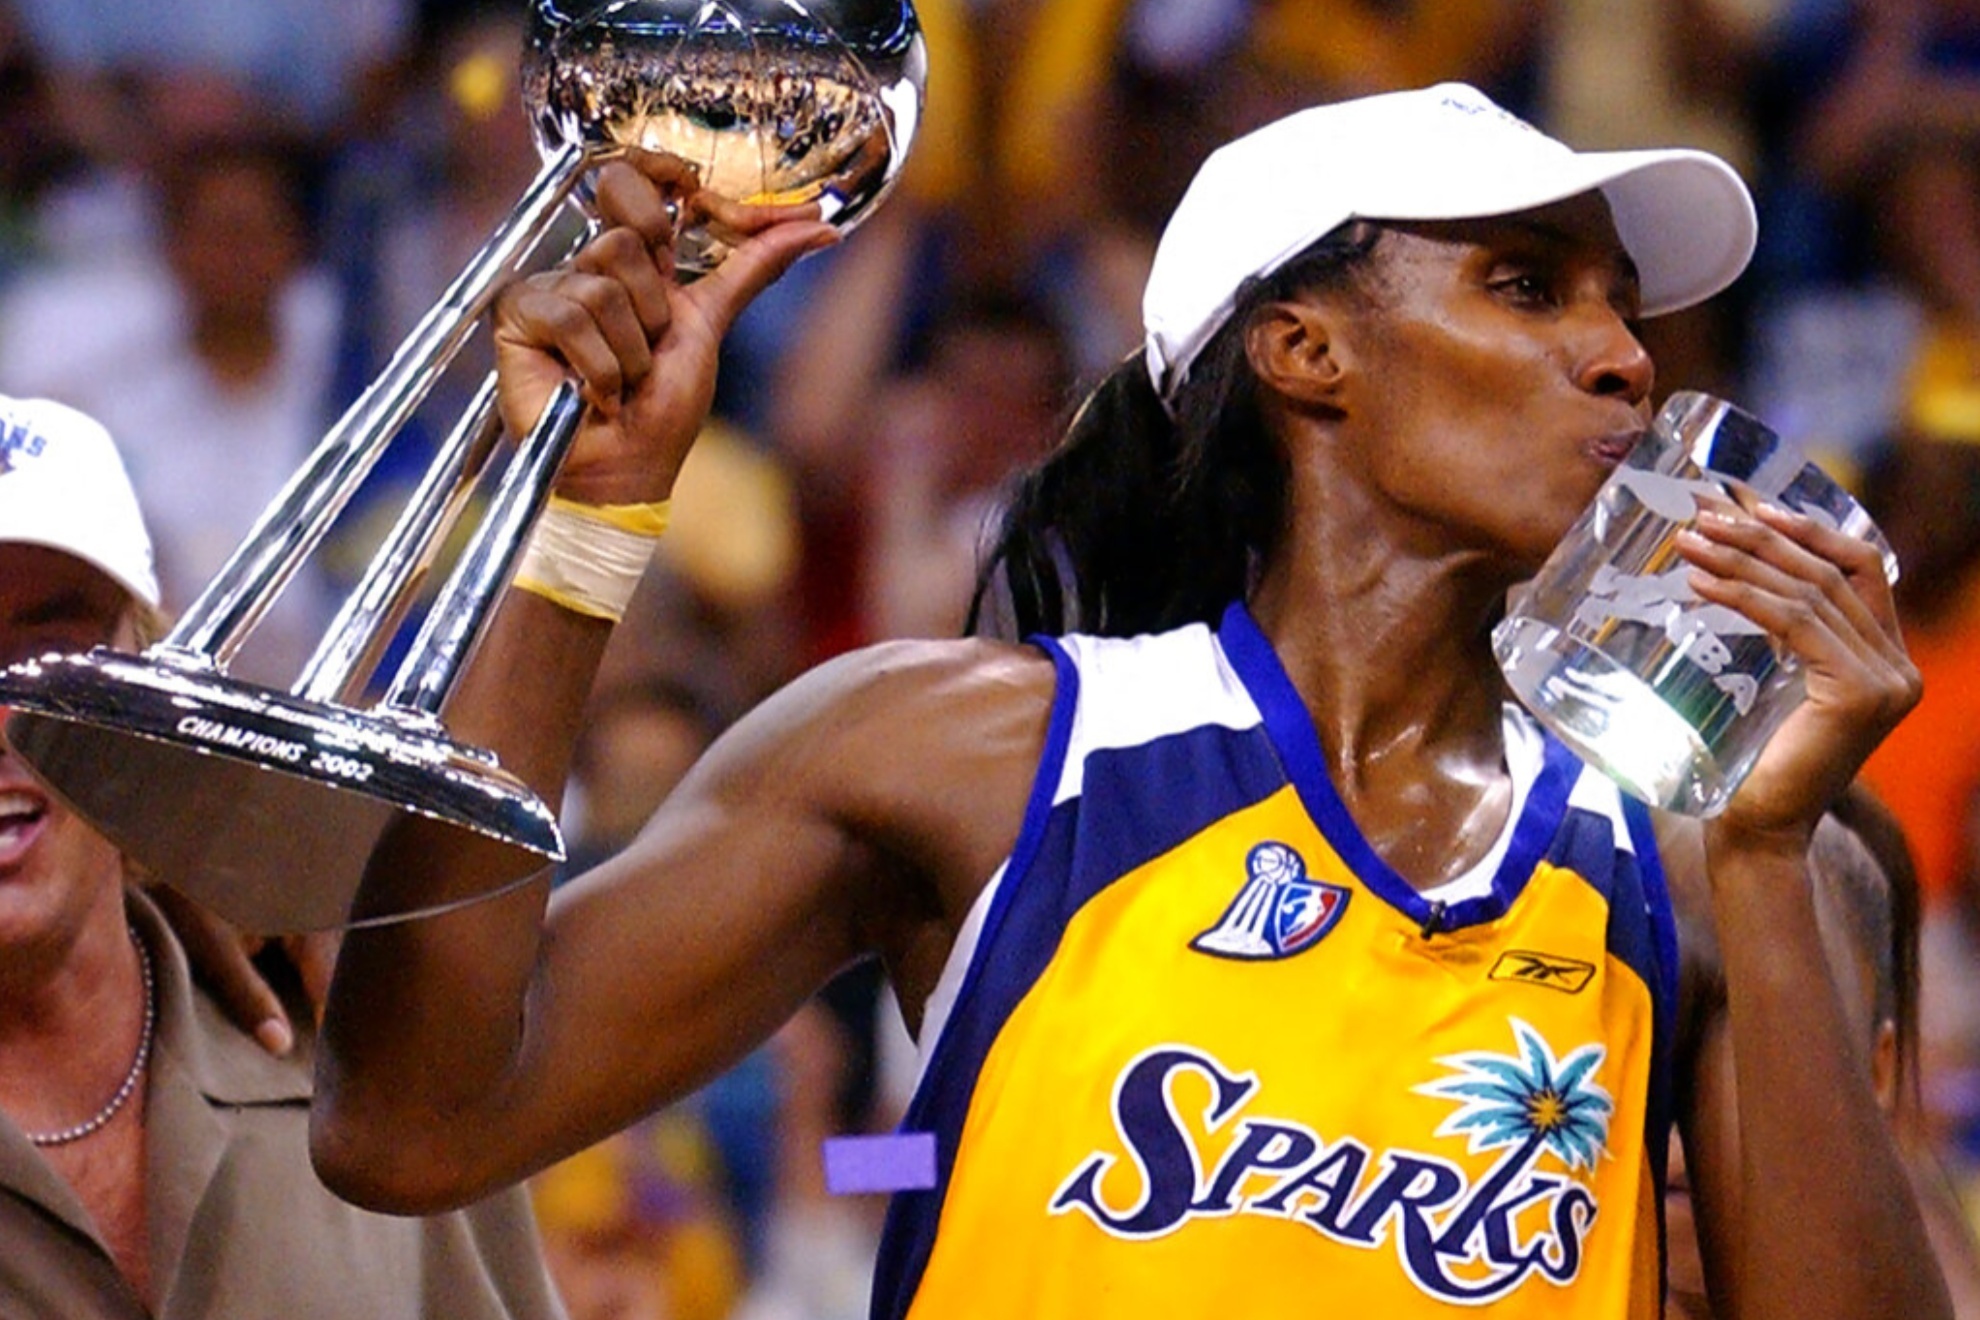 The Los Angeles Sparks have won three WNBA Championships